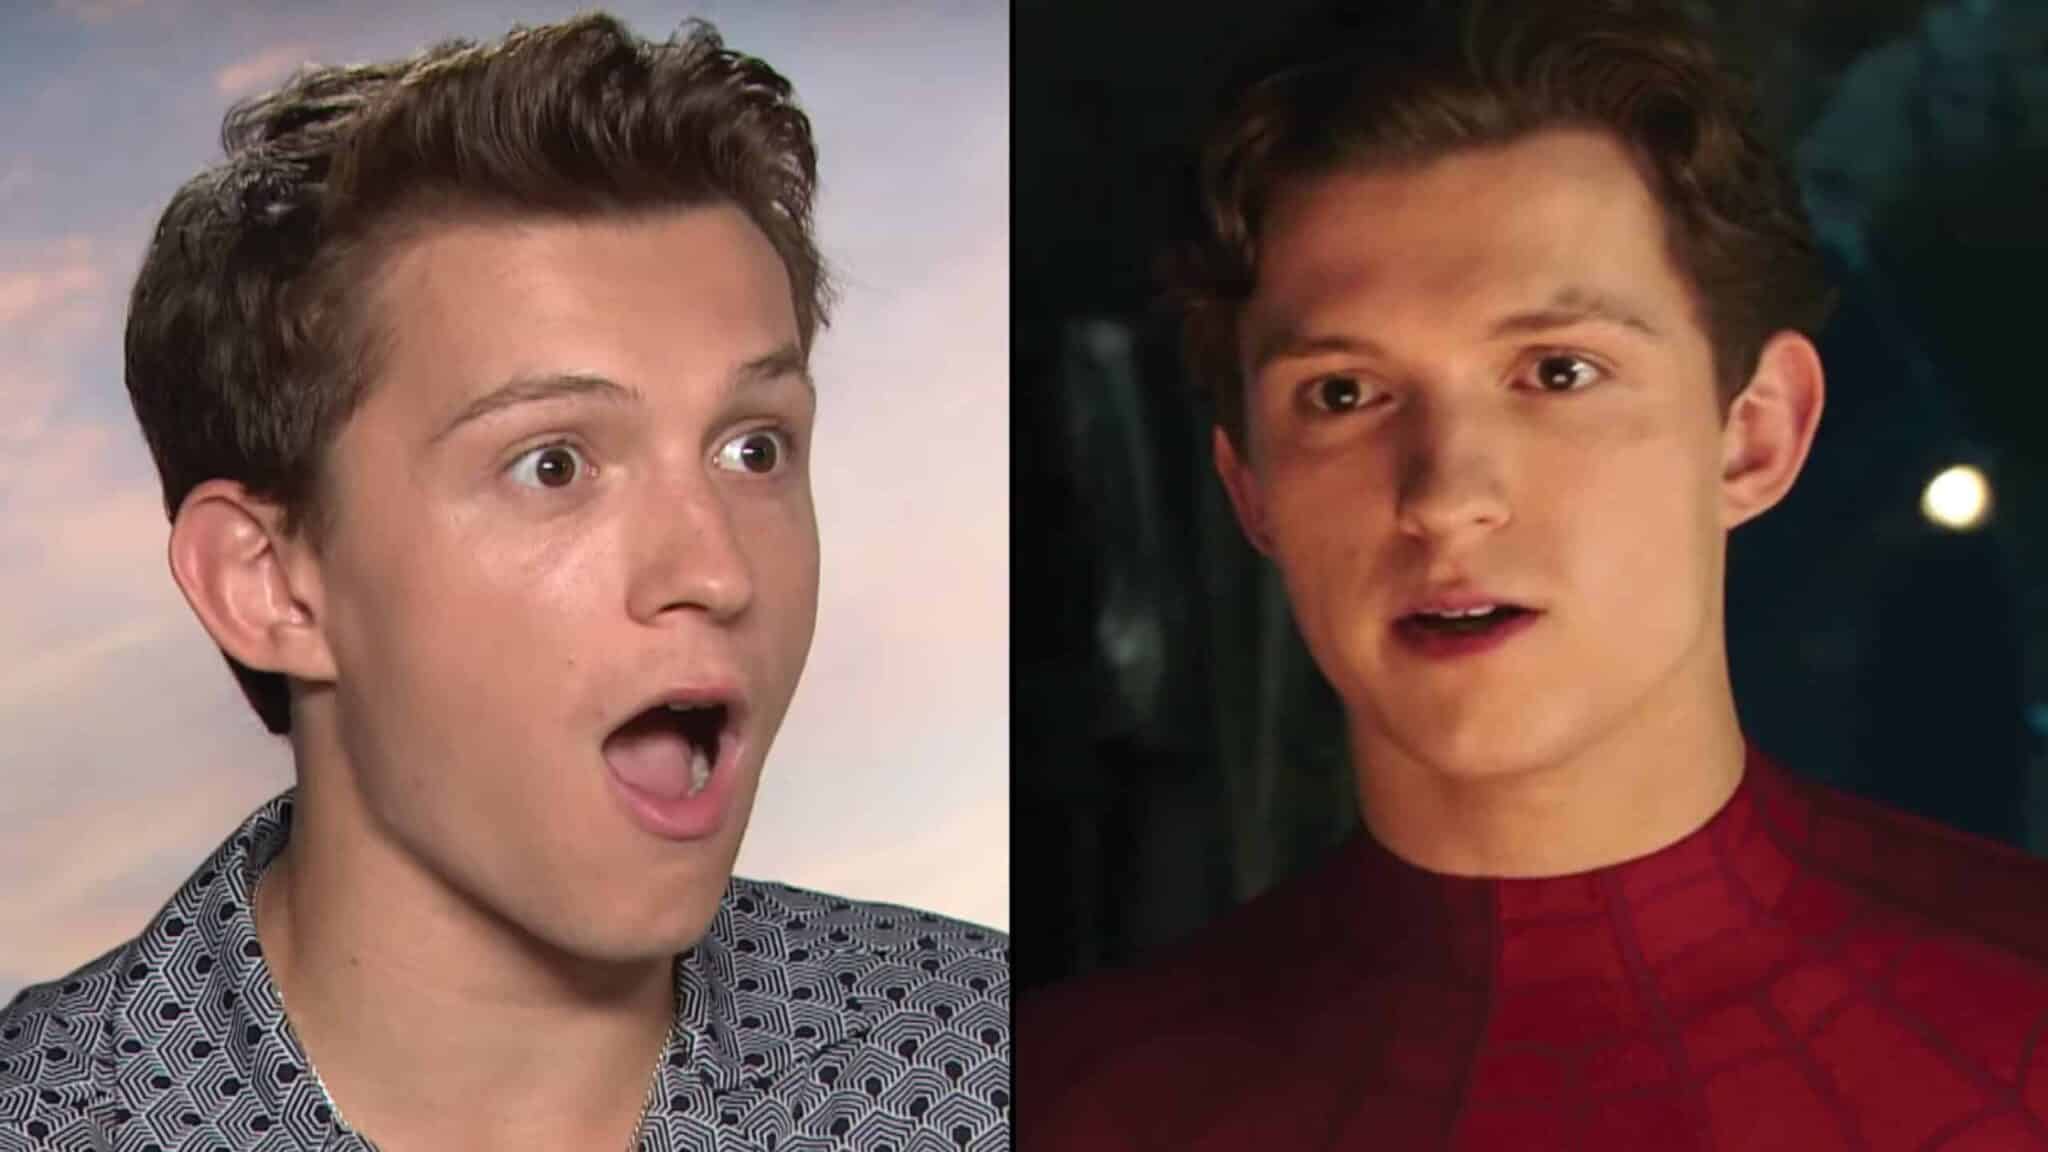 How tall is tom holland